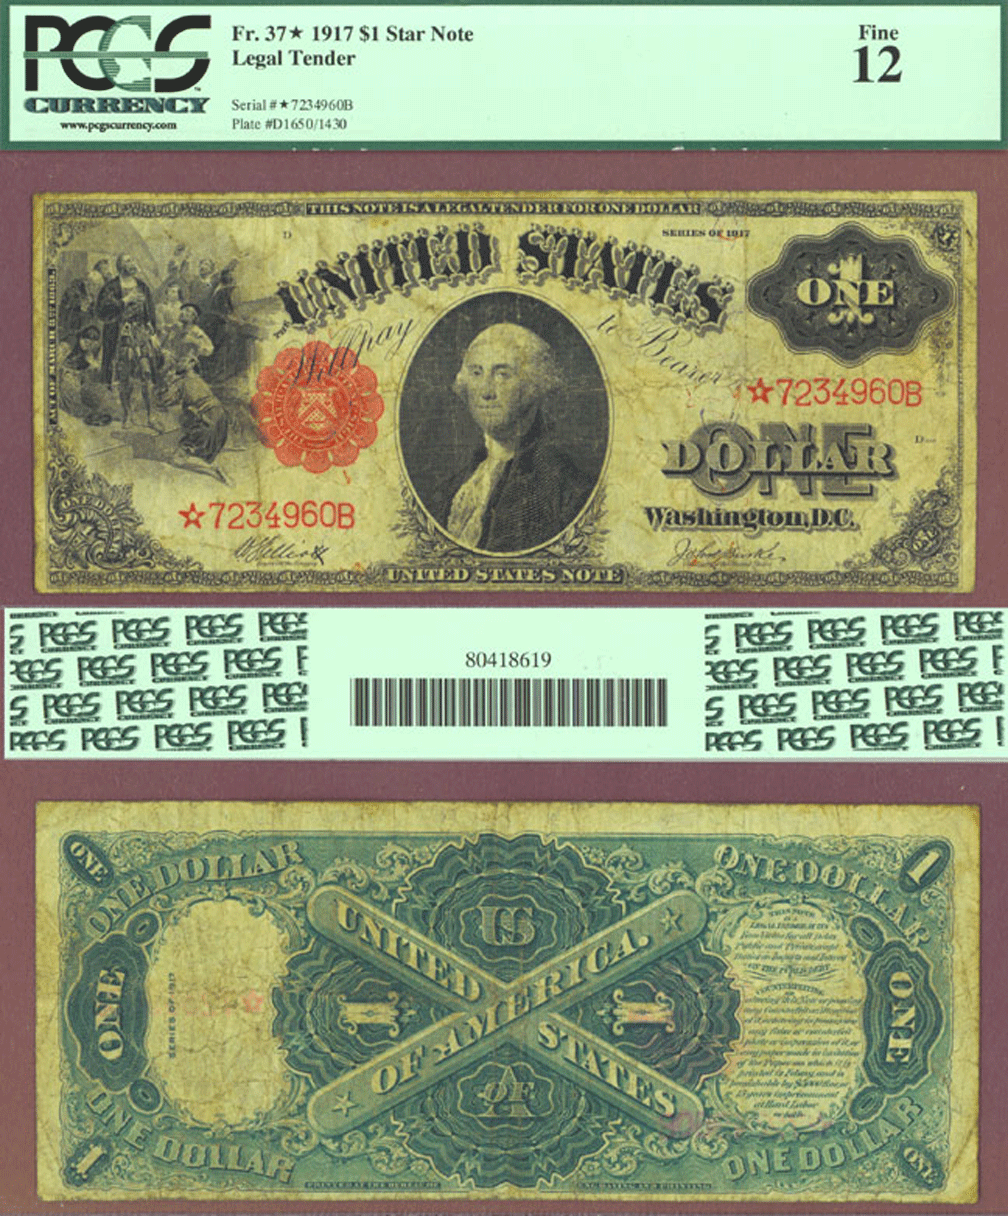 1917 $1.00 FR-37 Large Size US Legal Tender Star Note PCGS Fine 12